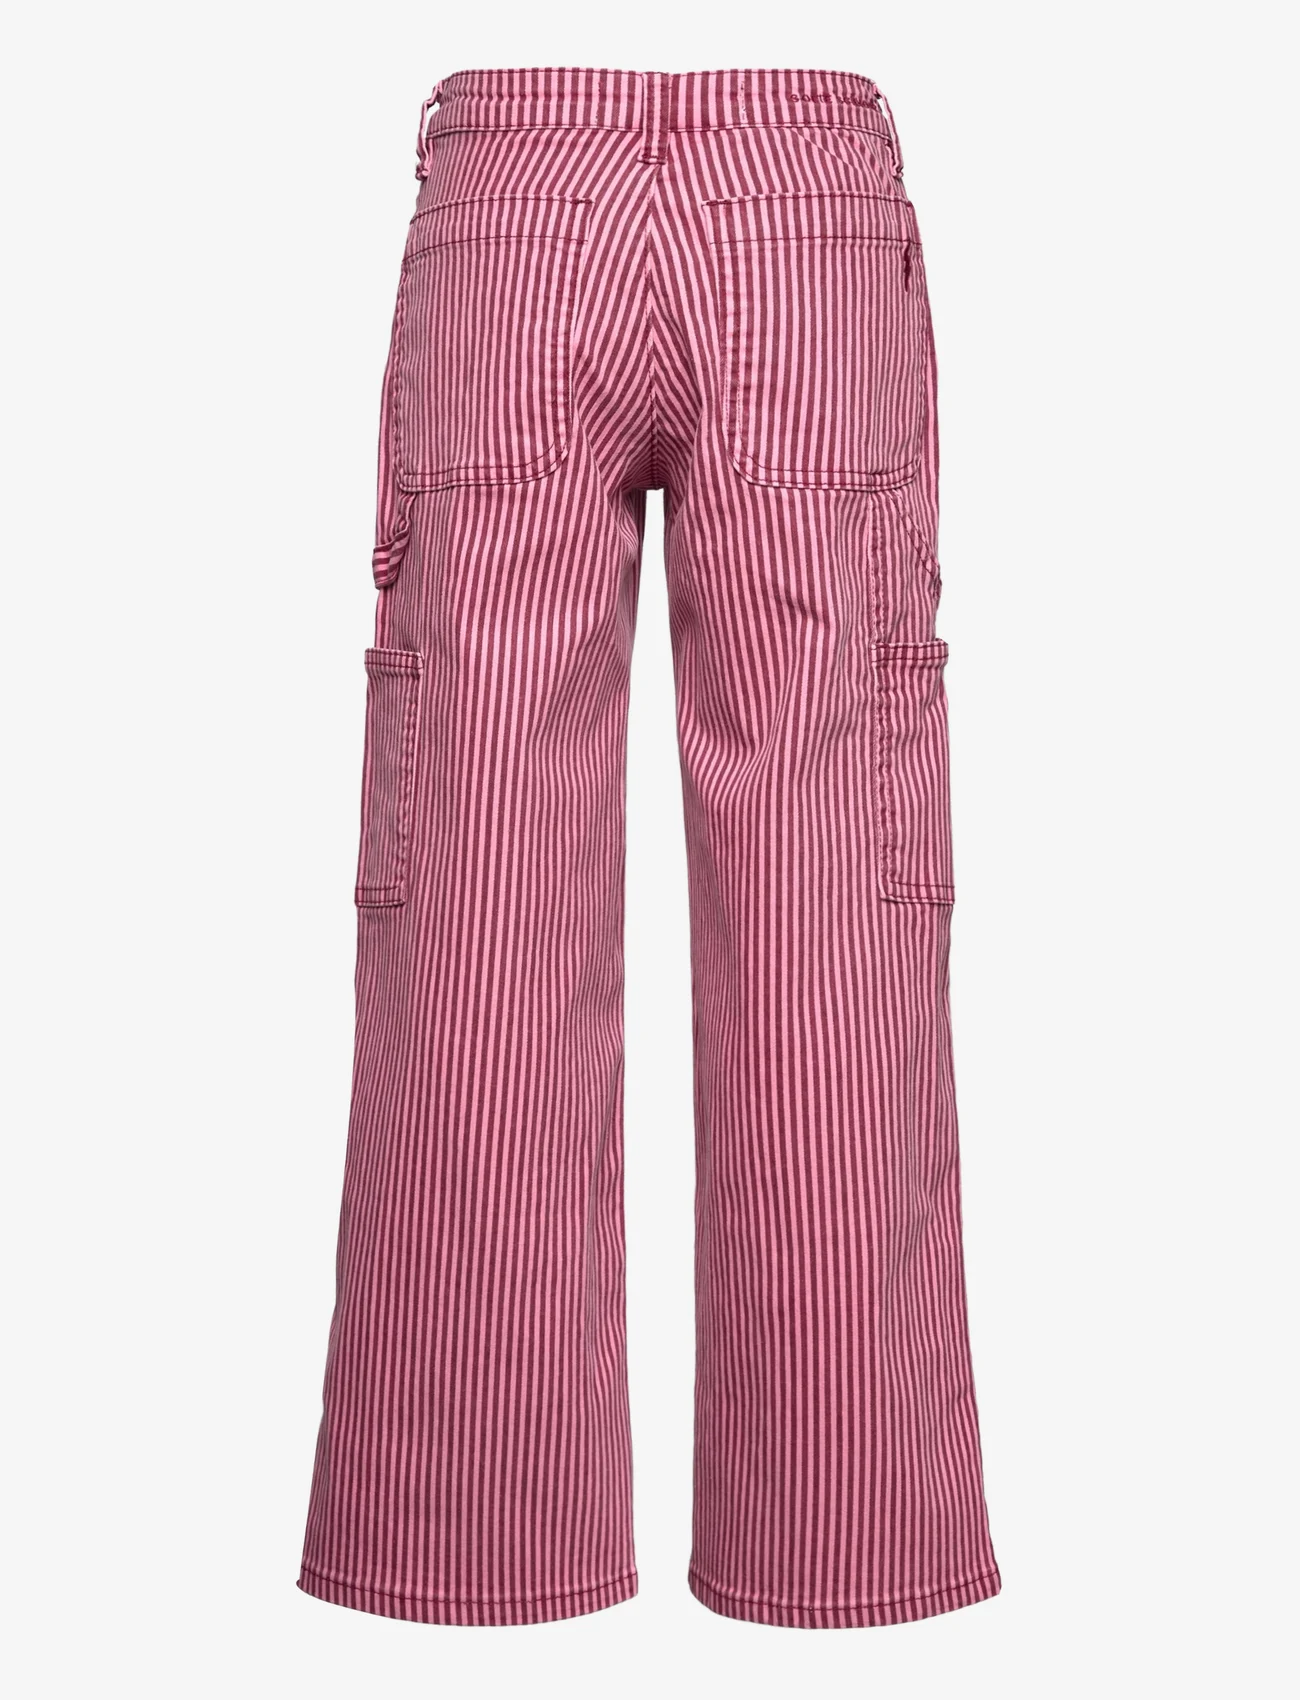 Sofie Schnoor Young - Pants - trousers - red striped - 1